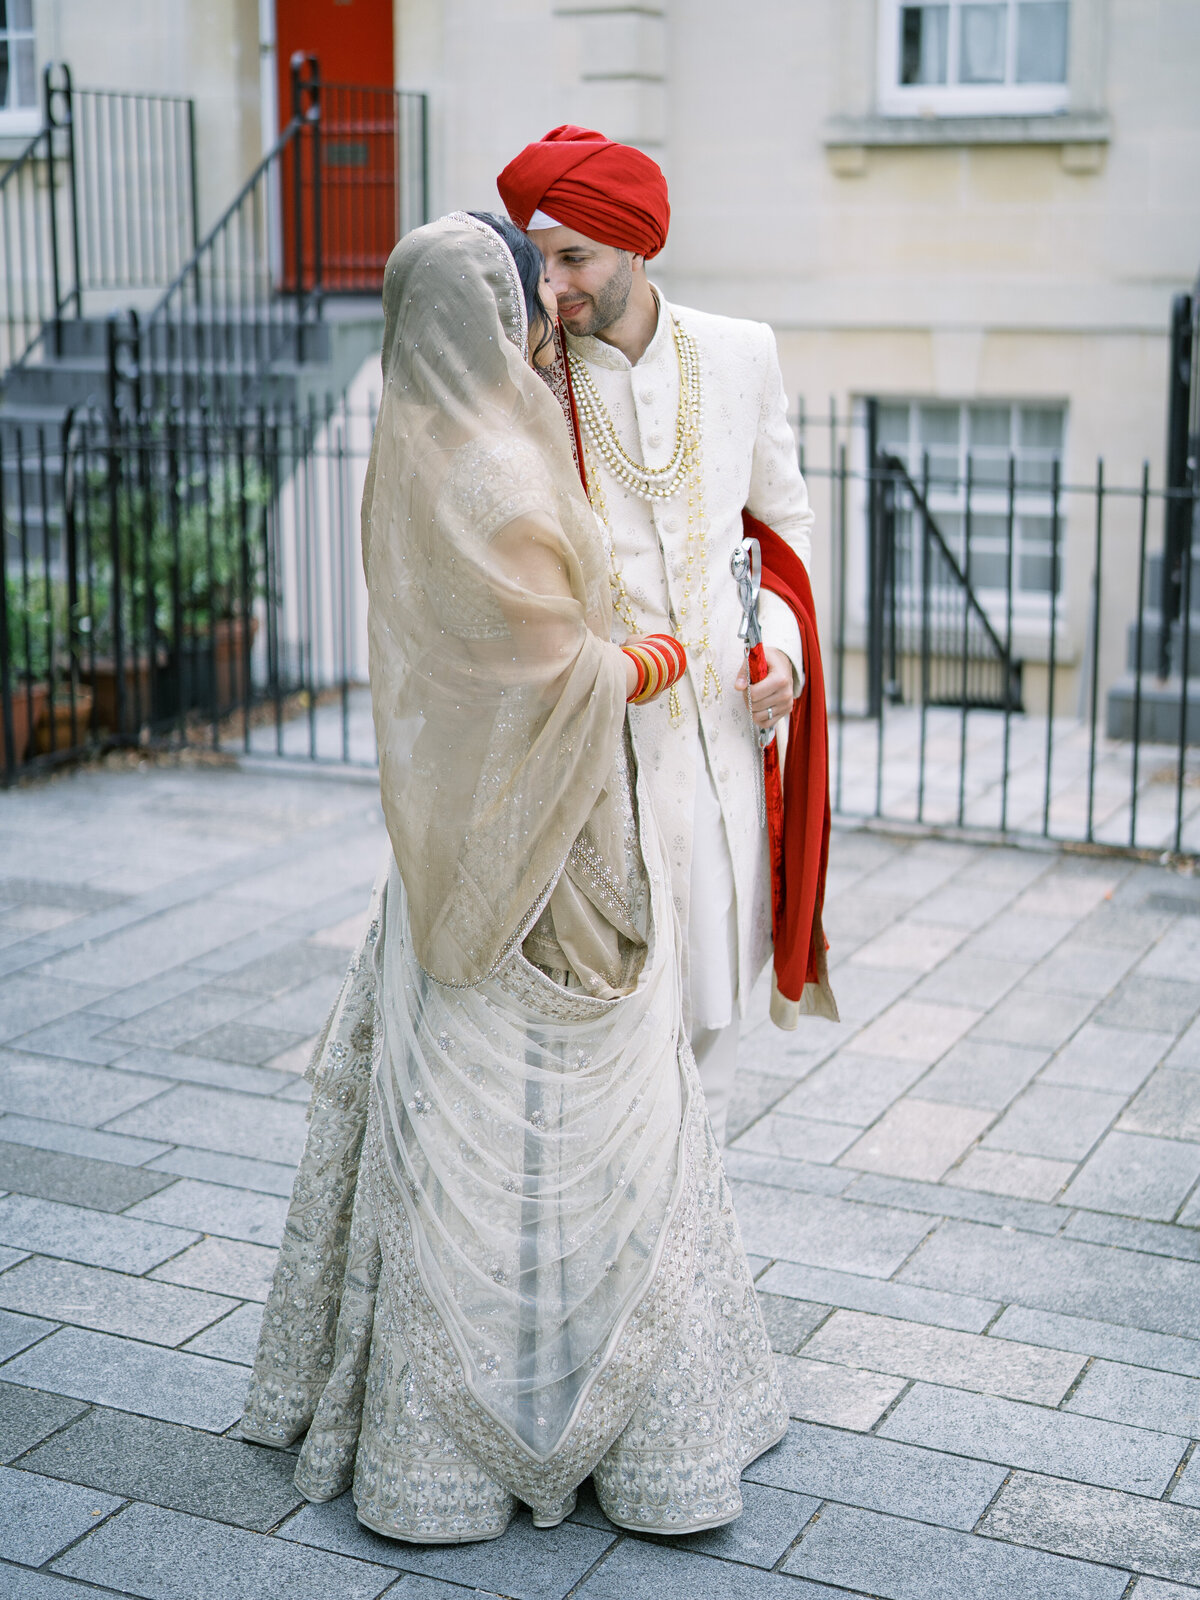 Bride and groom in traditional dress at Sikh wedding